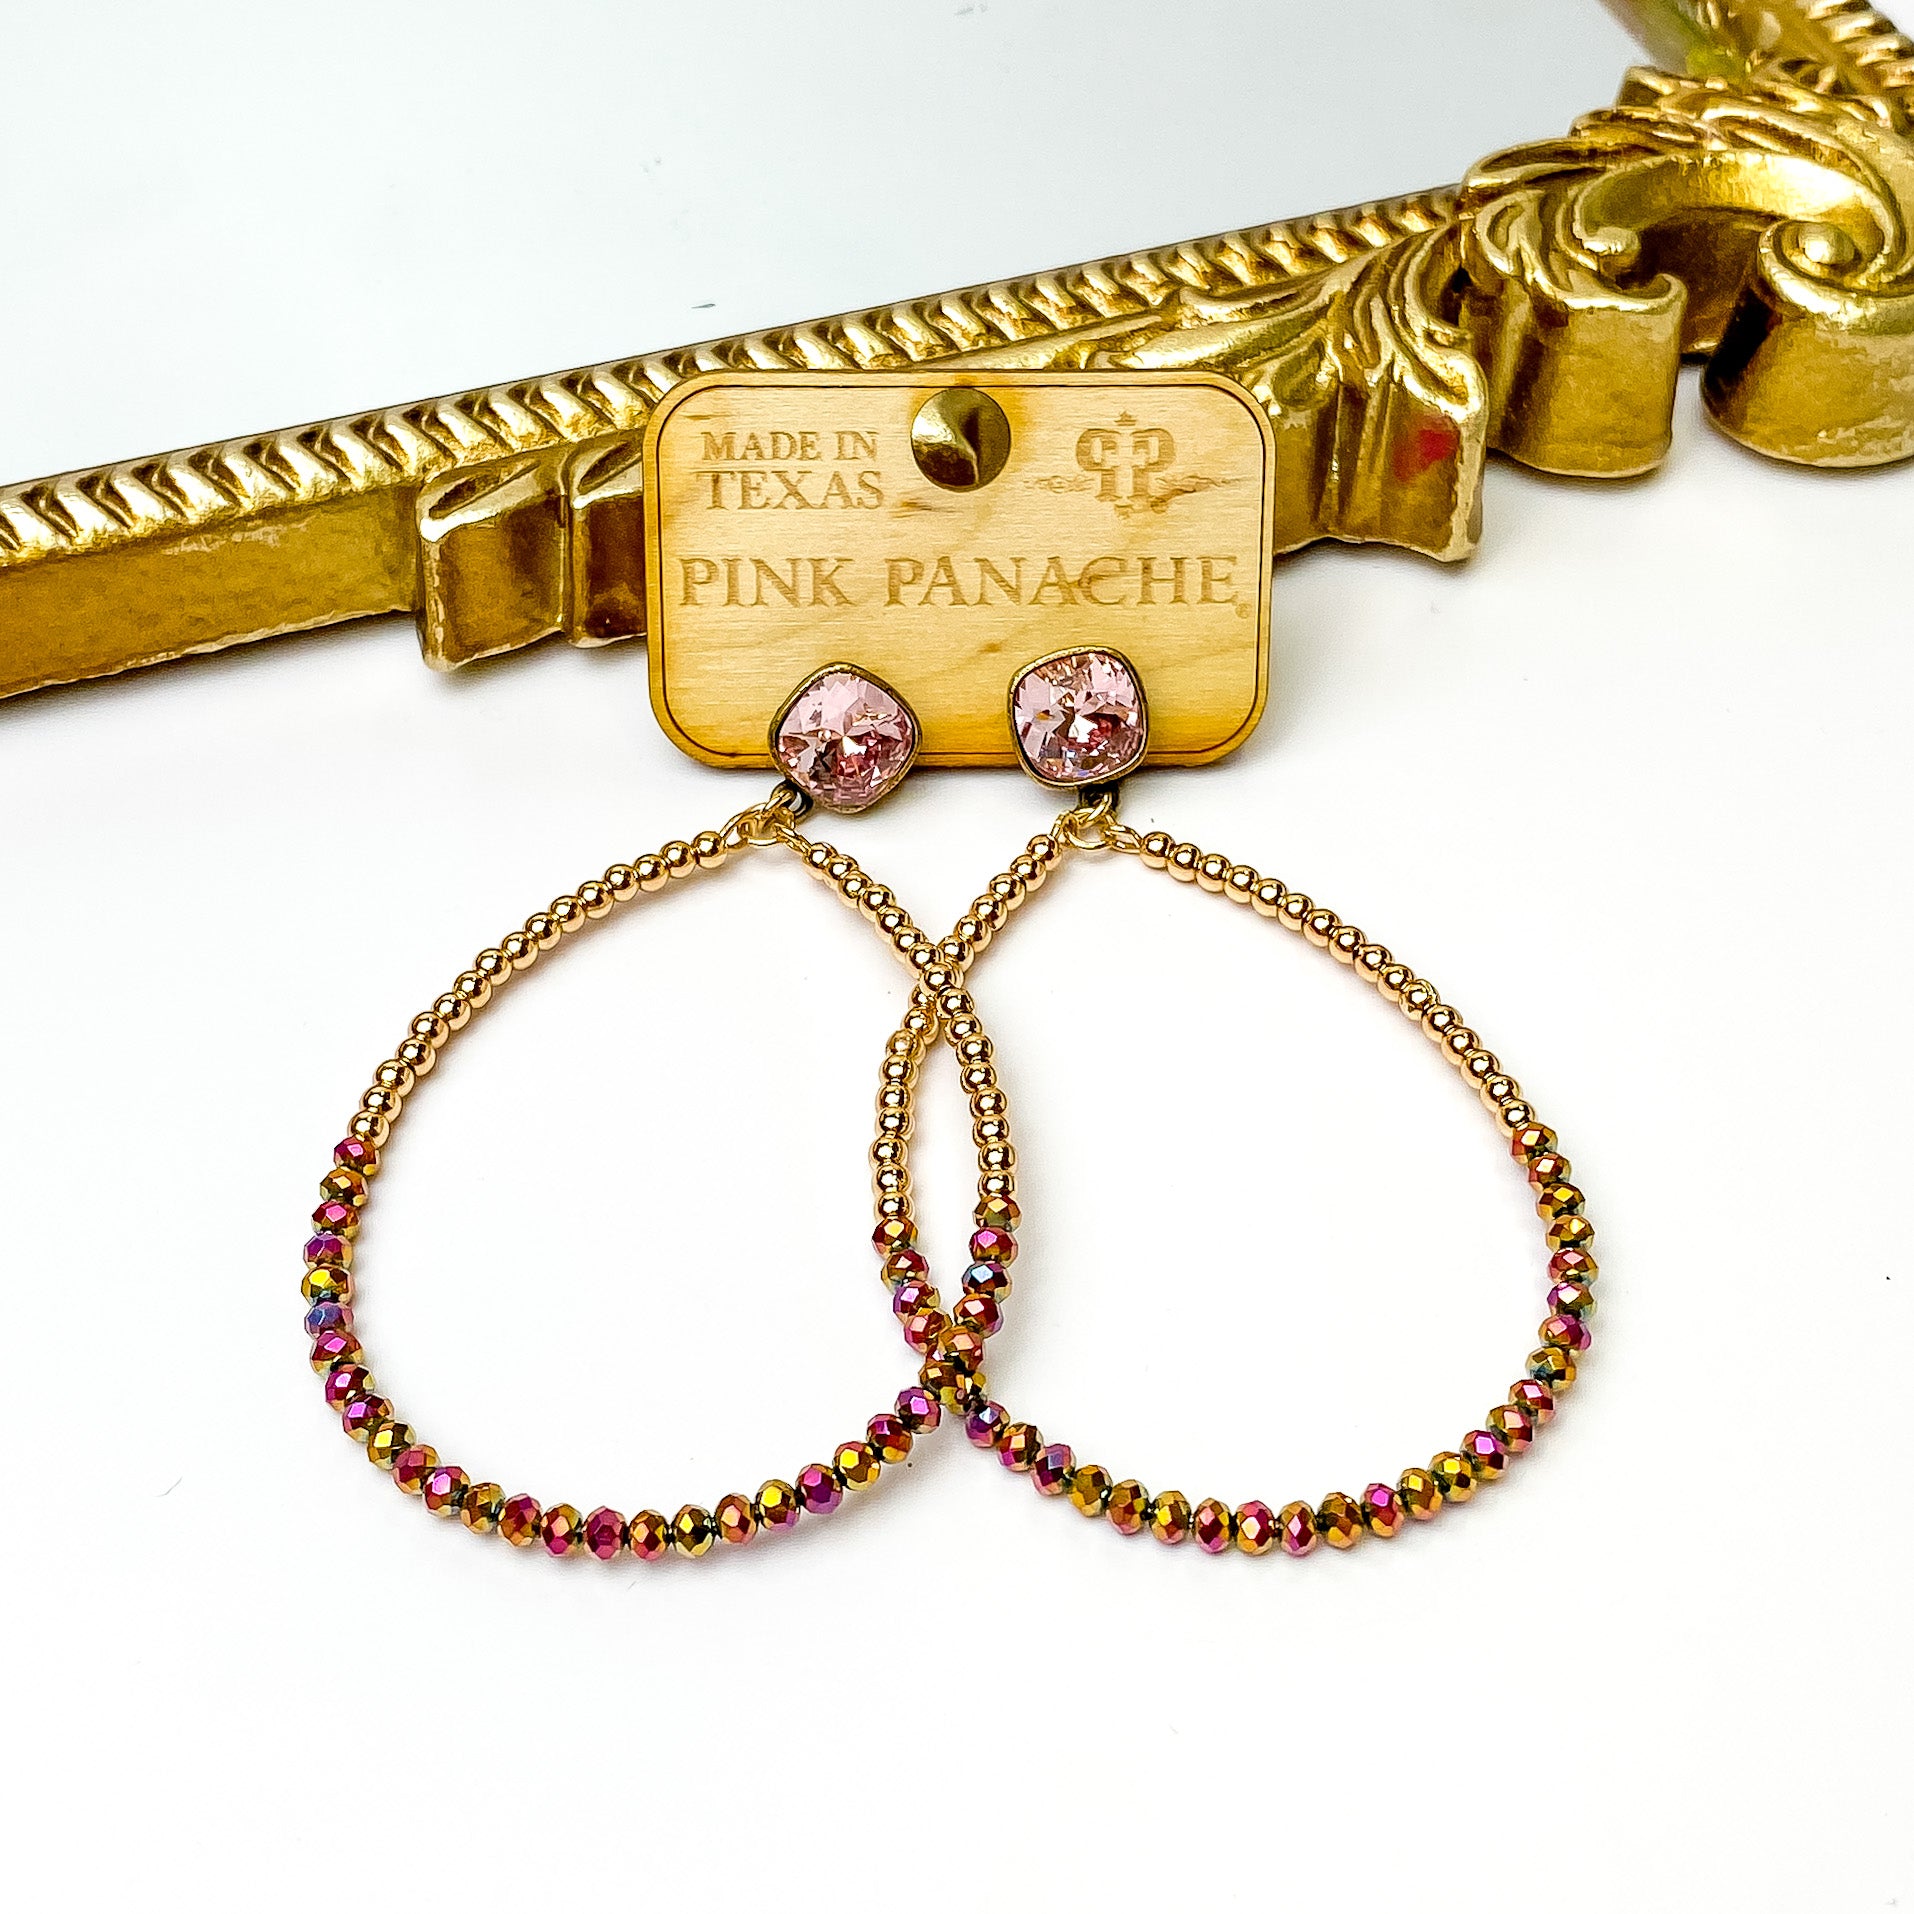 Light rose cushion cut post back earrings with a teardrop pendant. This pendant includes half gold beads and the bottom half with dark pink beads. These earrings are pictured on a wood earrings holder in front of a gold mirror on a white background. 